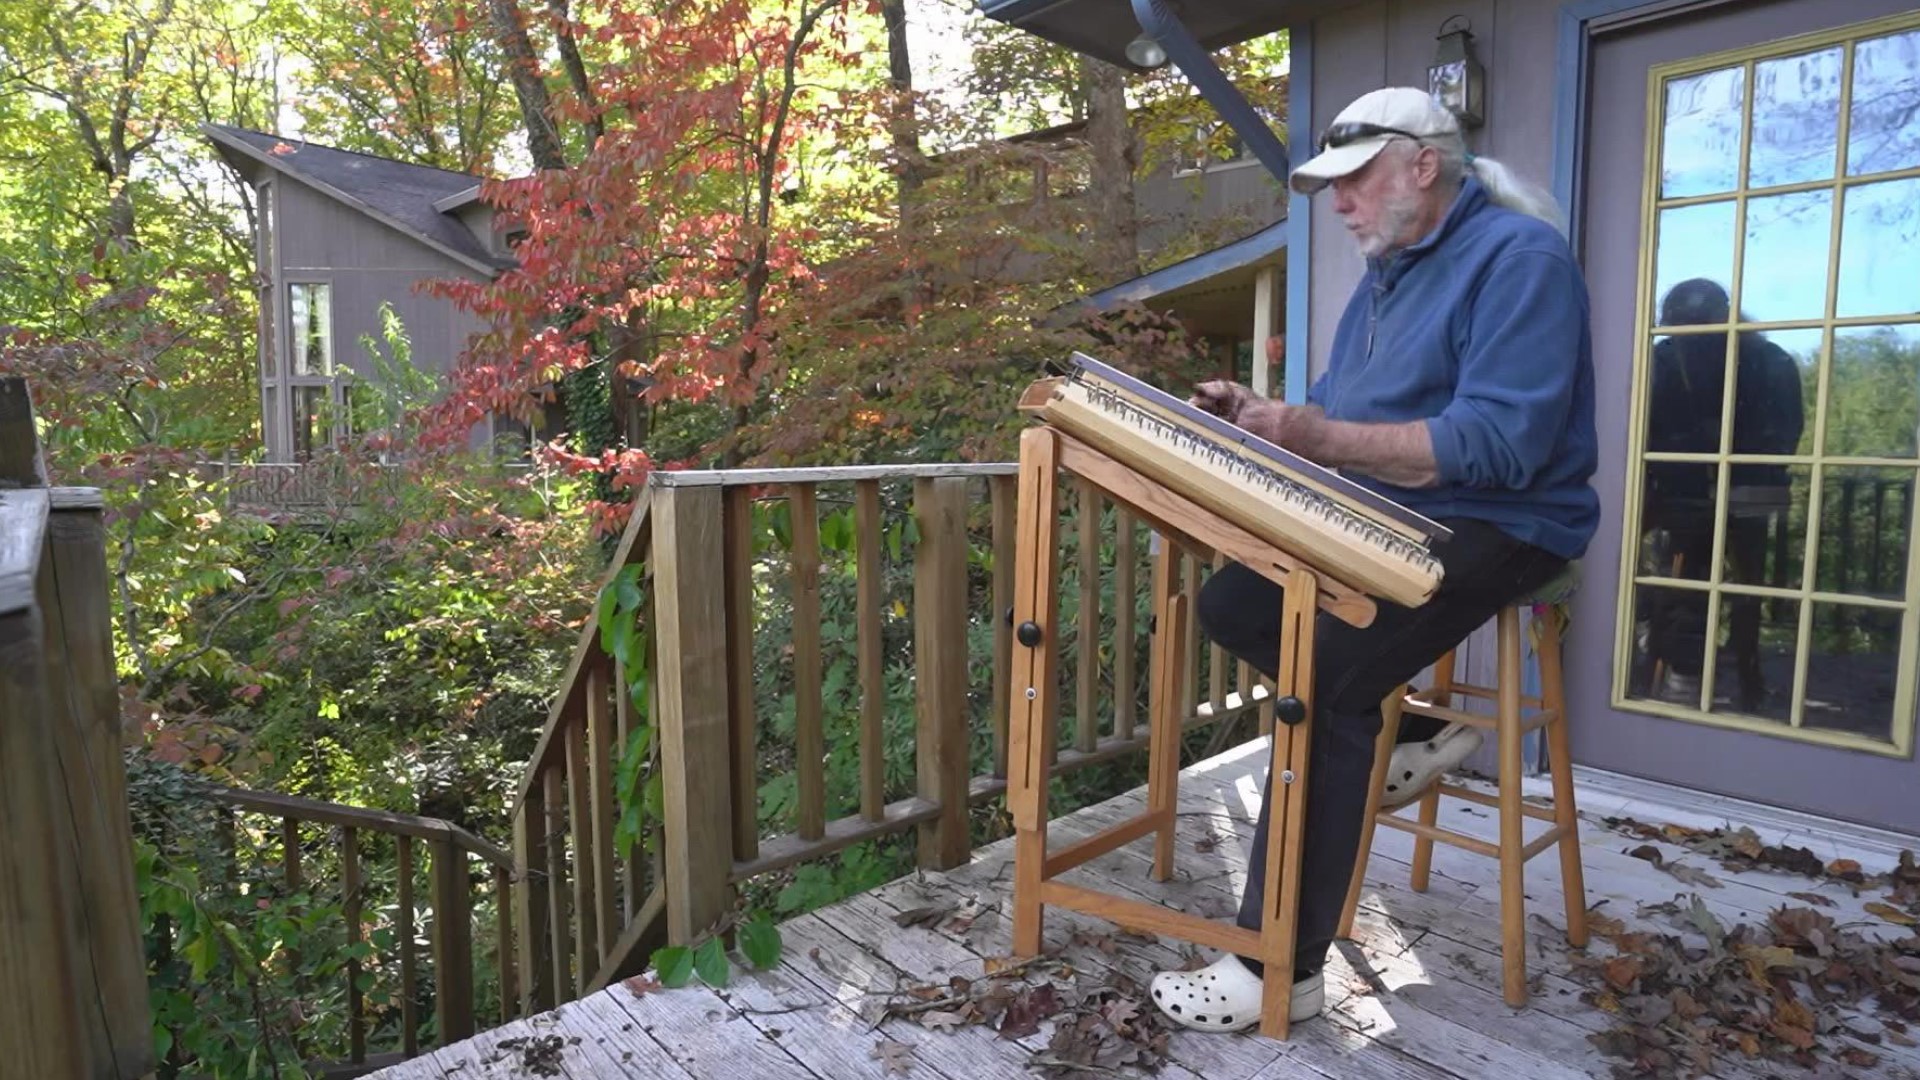 Jerry Read Smith and his assistant make six hammered dulcimers at a time with decades-old techniques that now include laser guidance.